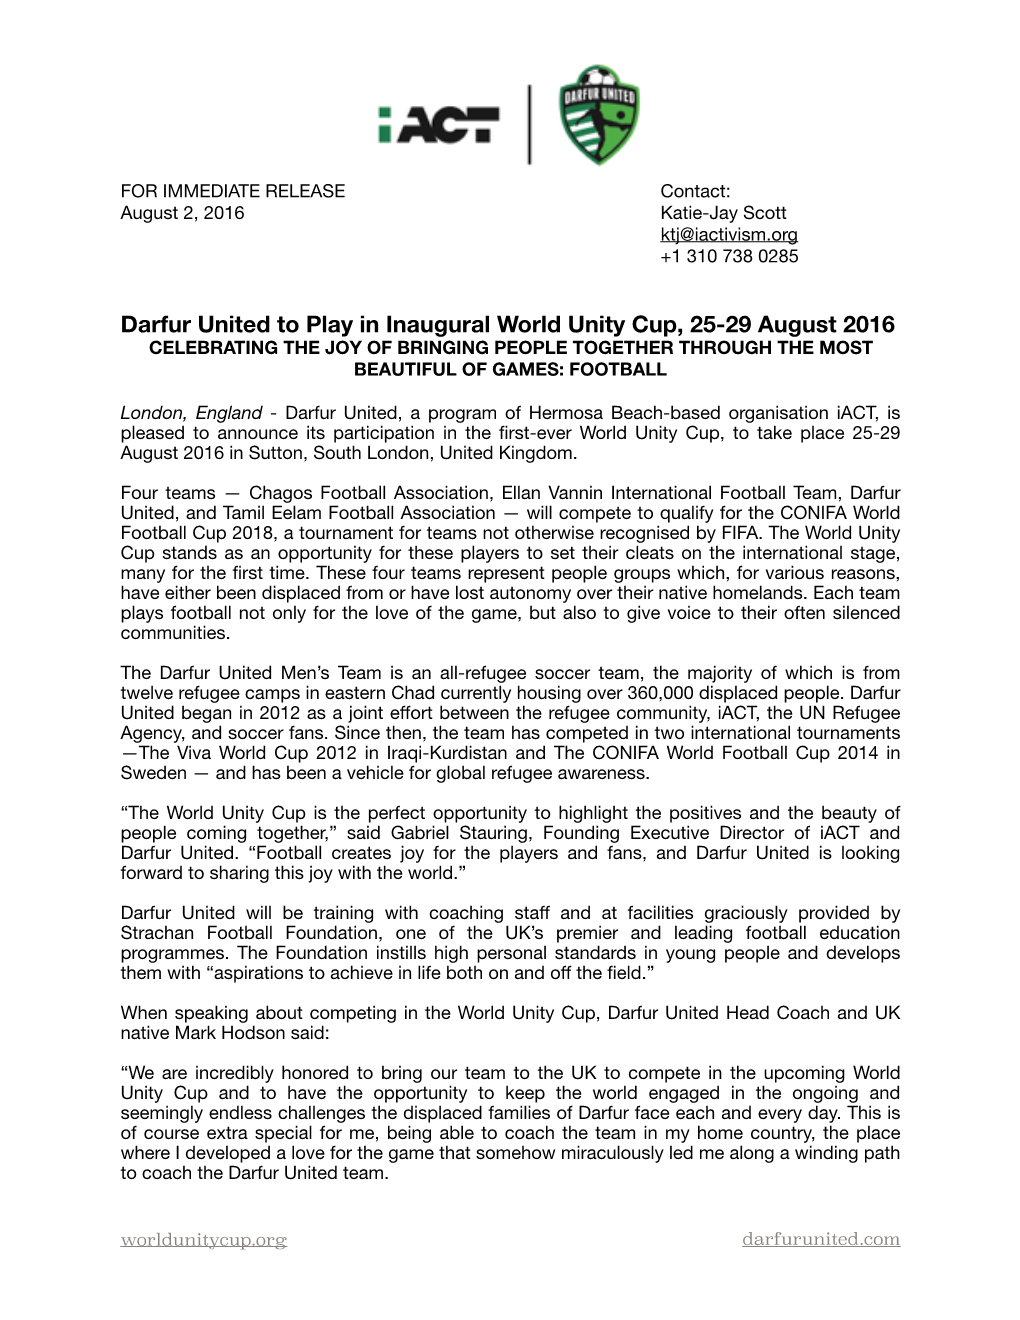 Darfur United to World Unity Cup for UK